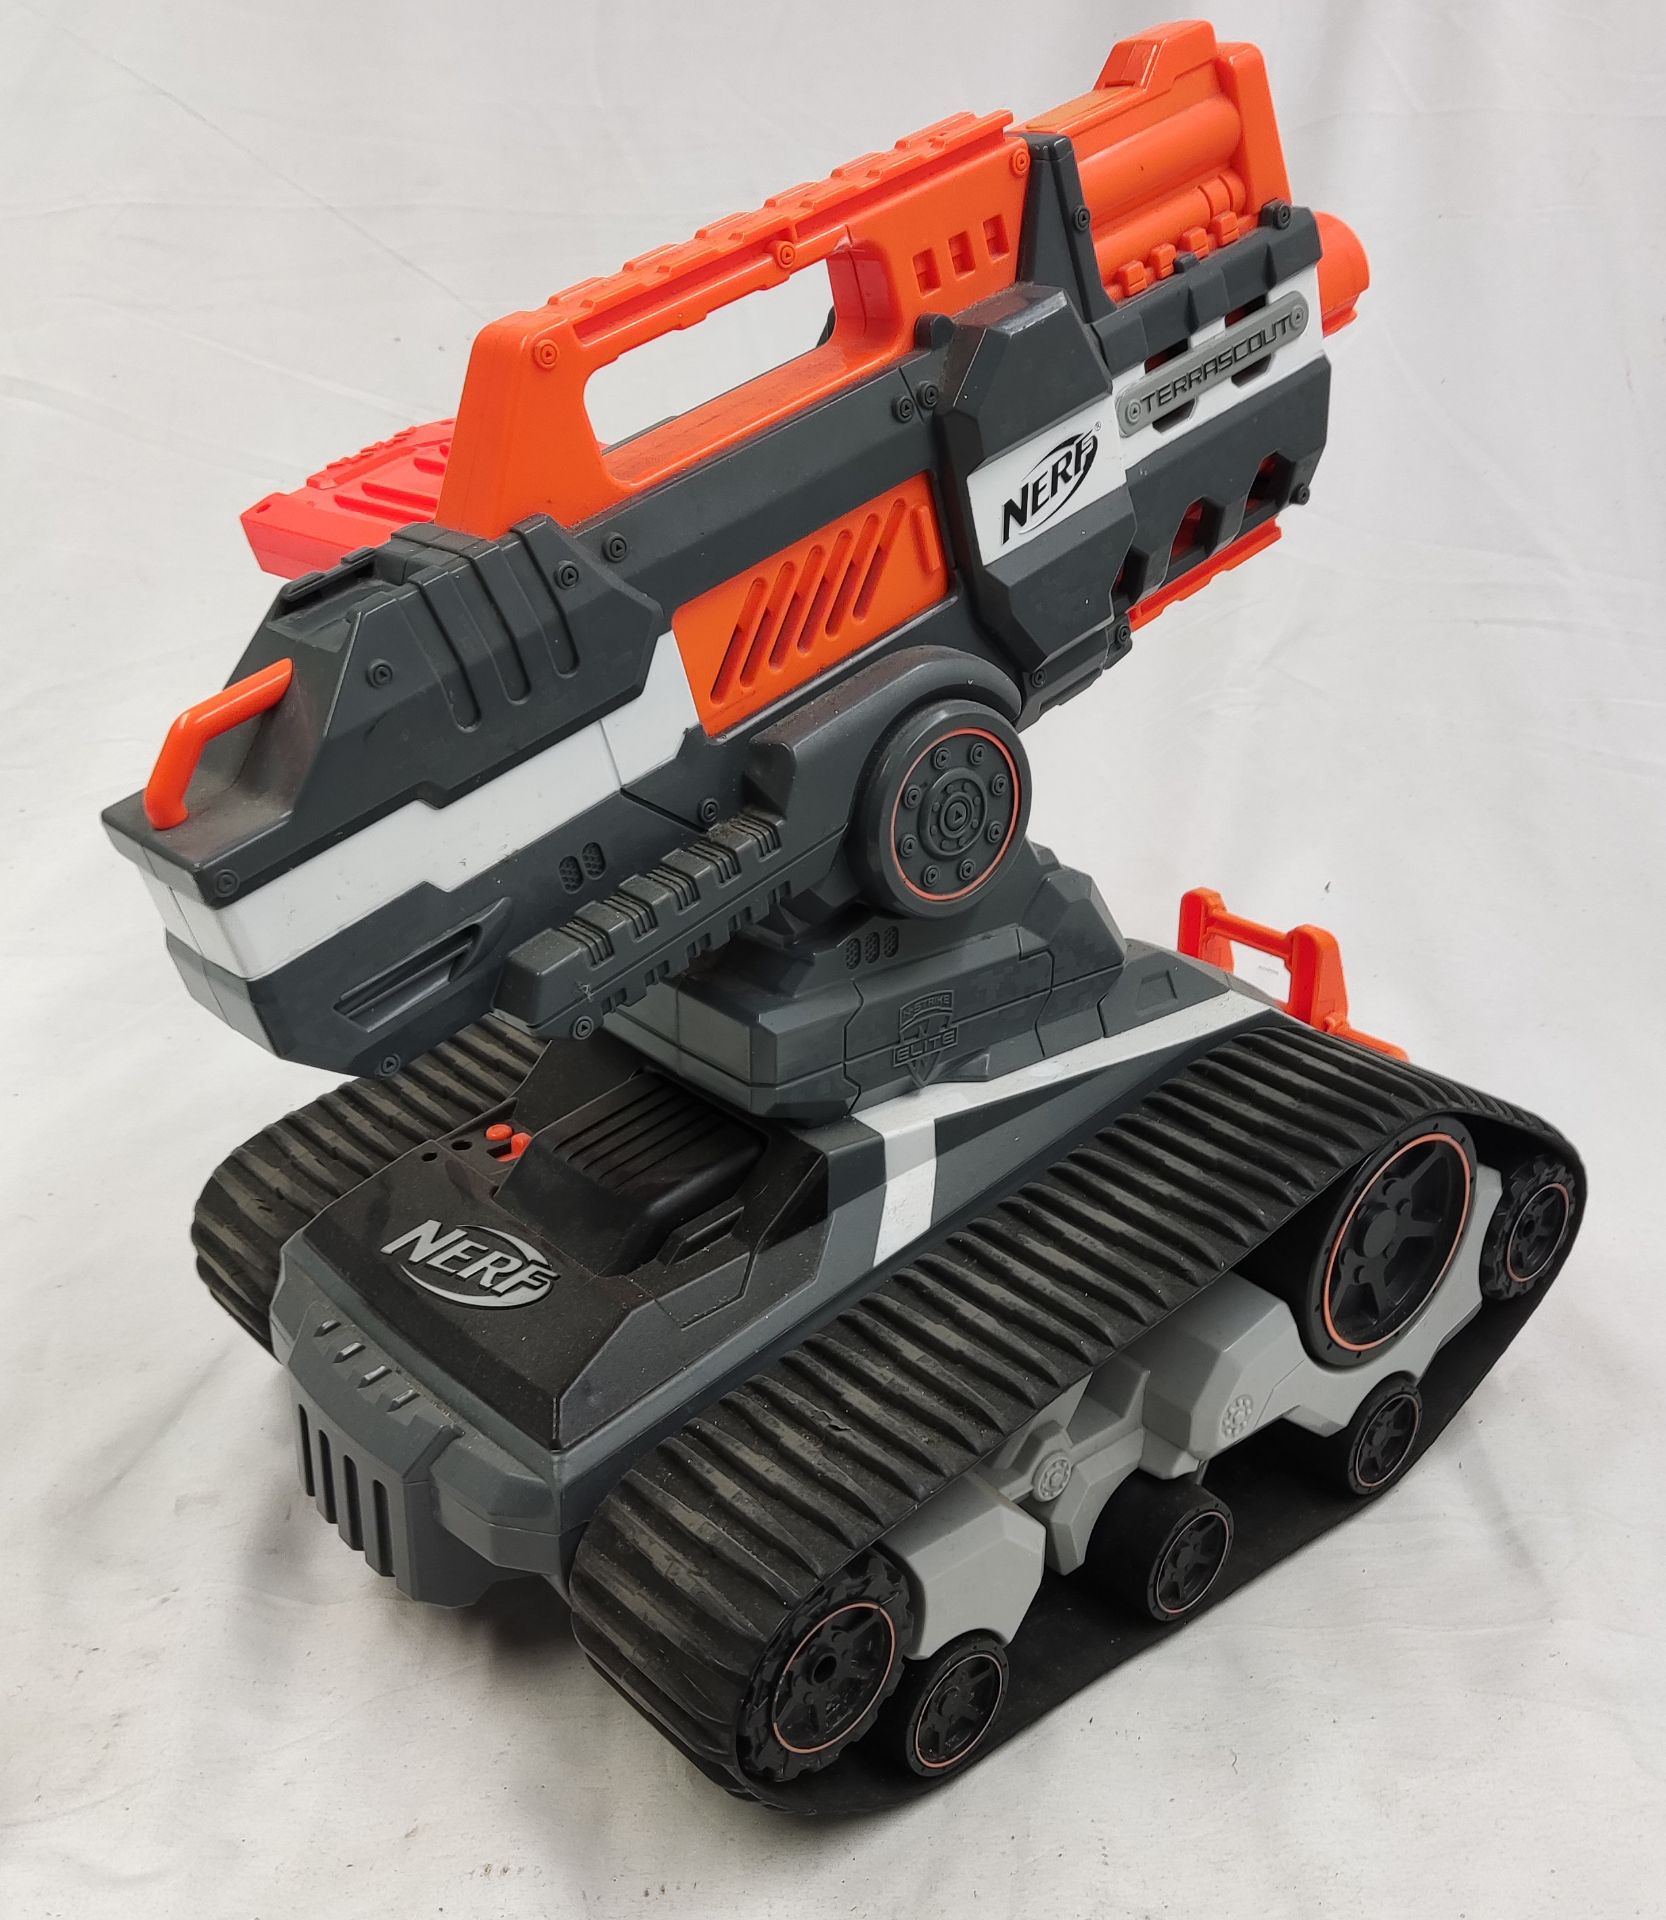 1 x Nerf Terrascout Remote Control Nerf Tank With Video - Used - CL444 - NO VAT ON THE HAMMER - - Image 7 of 14